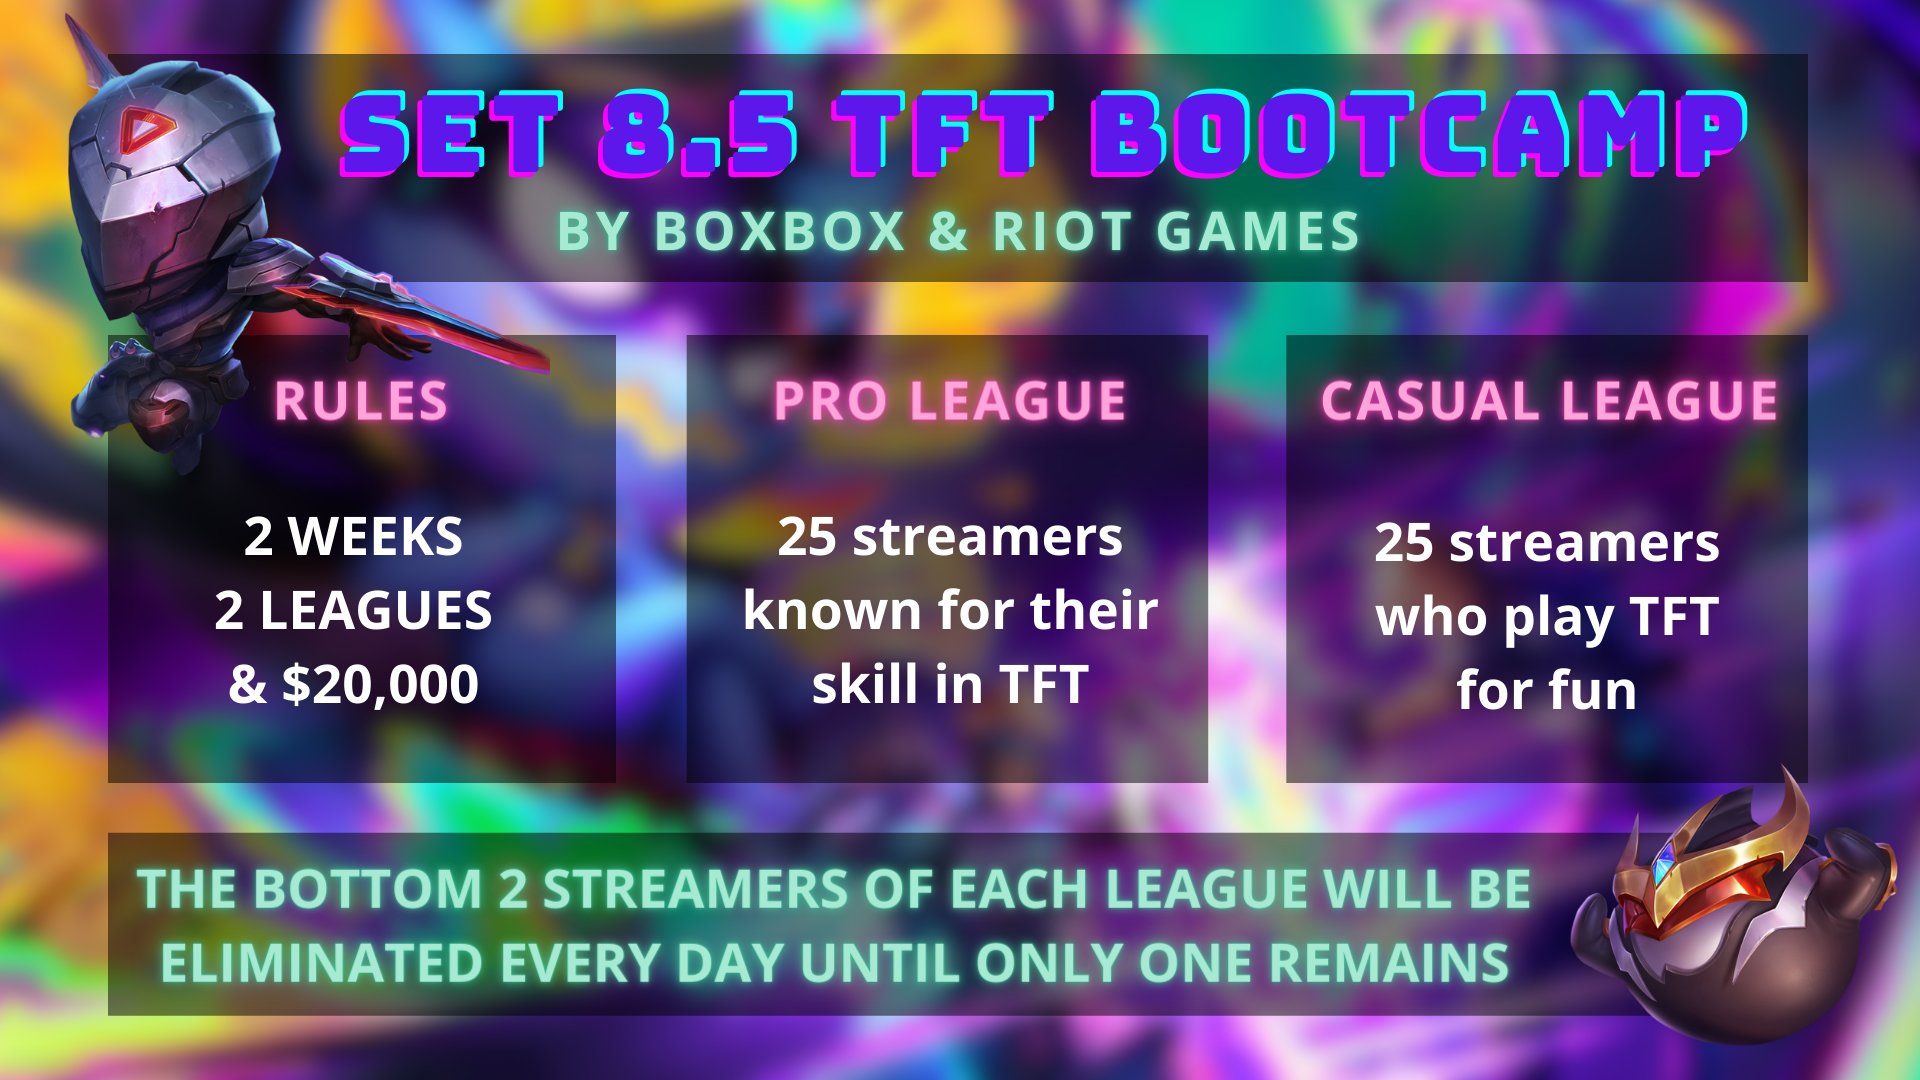 sᴀɴ on X: [ Stream Schedule 11.20 - 11.26 ] ✨BoxBox TFT Bootcamp is a GO✨  This week expect a lot of TFT and LoL as we grind to stay alive in